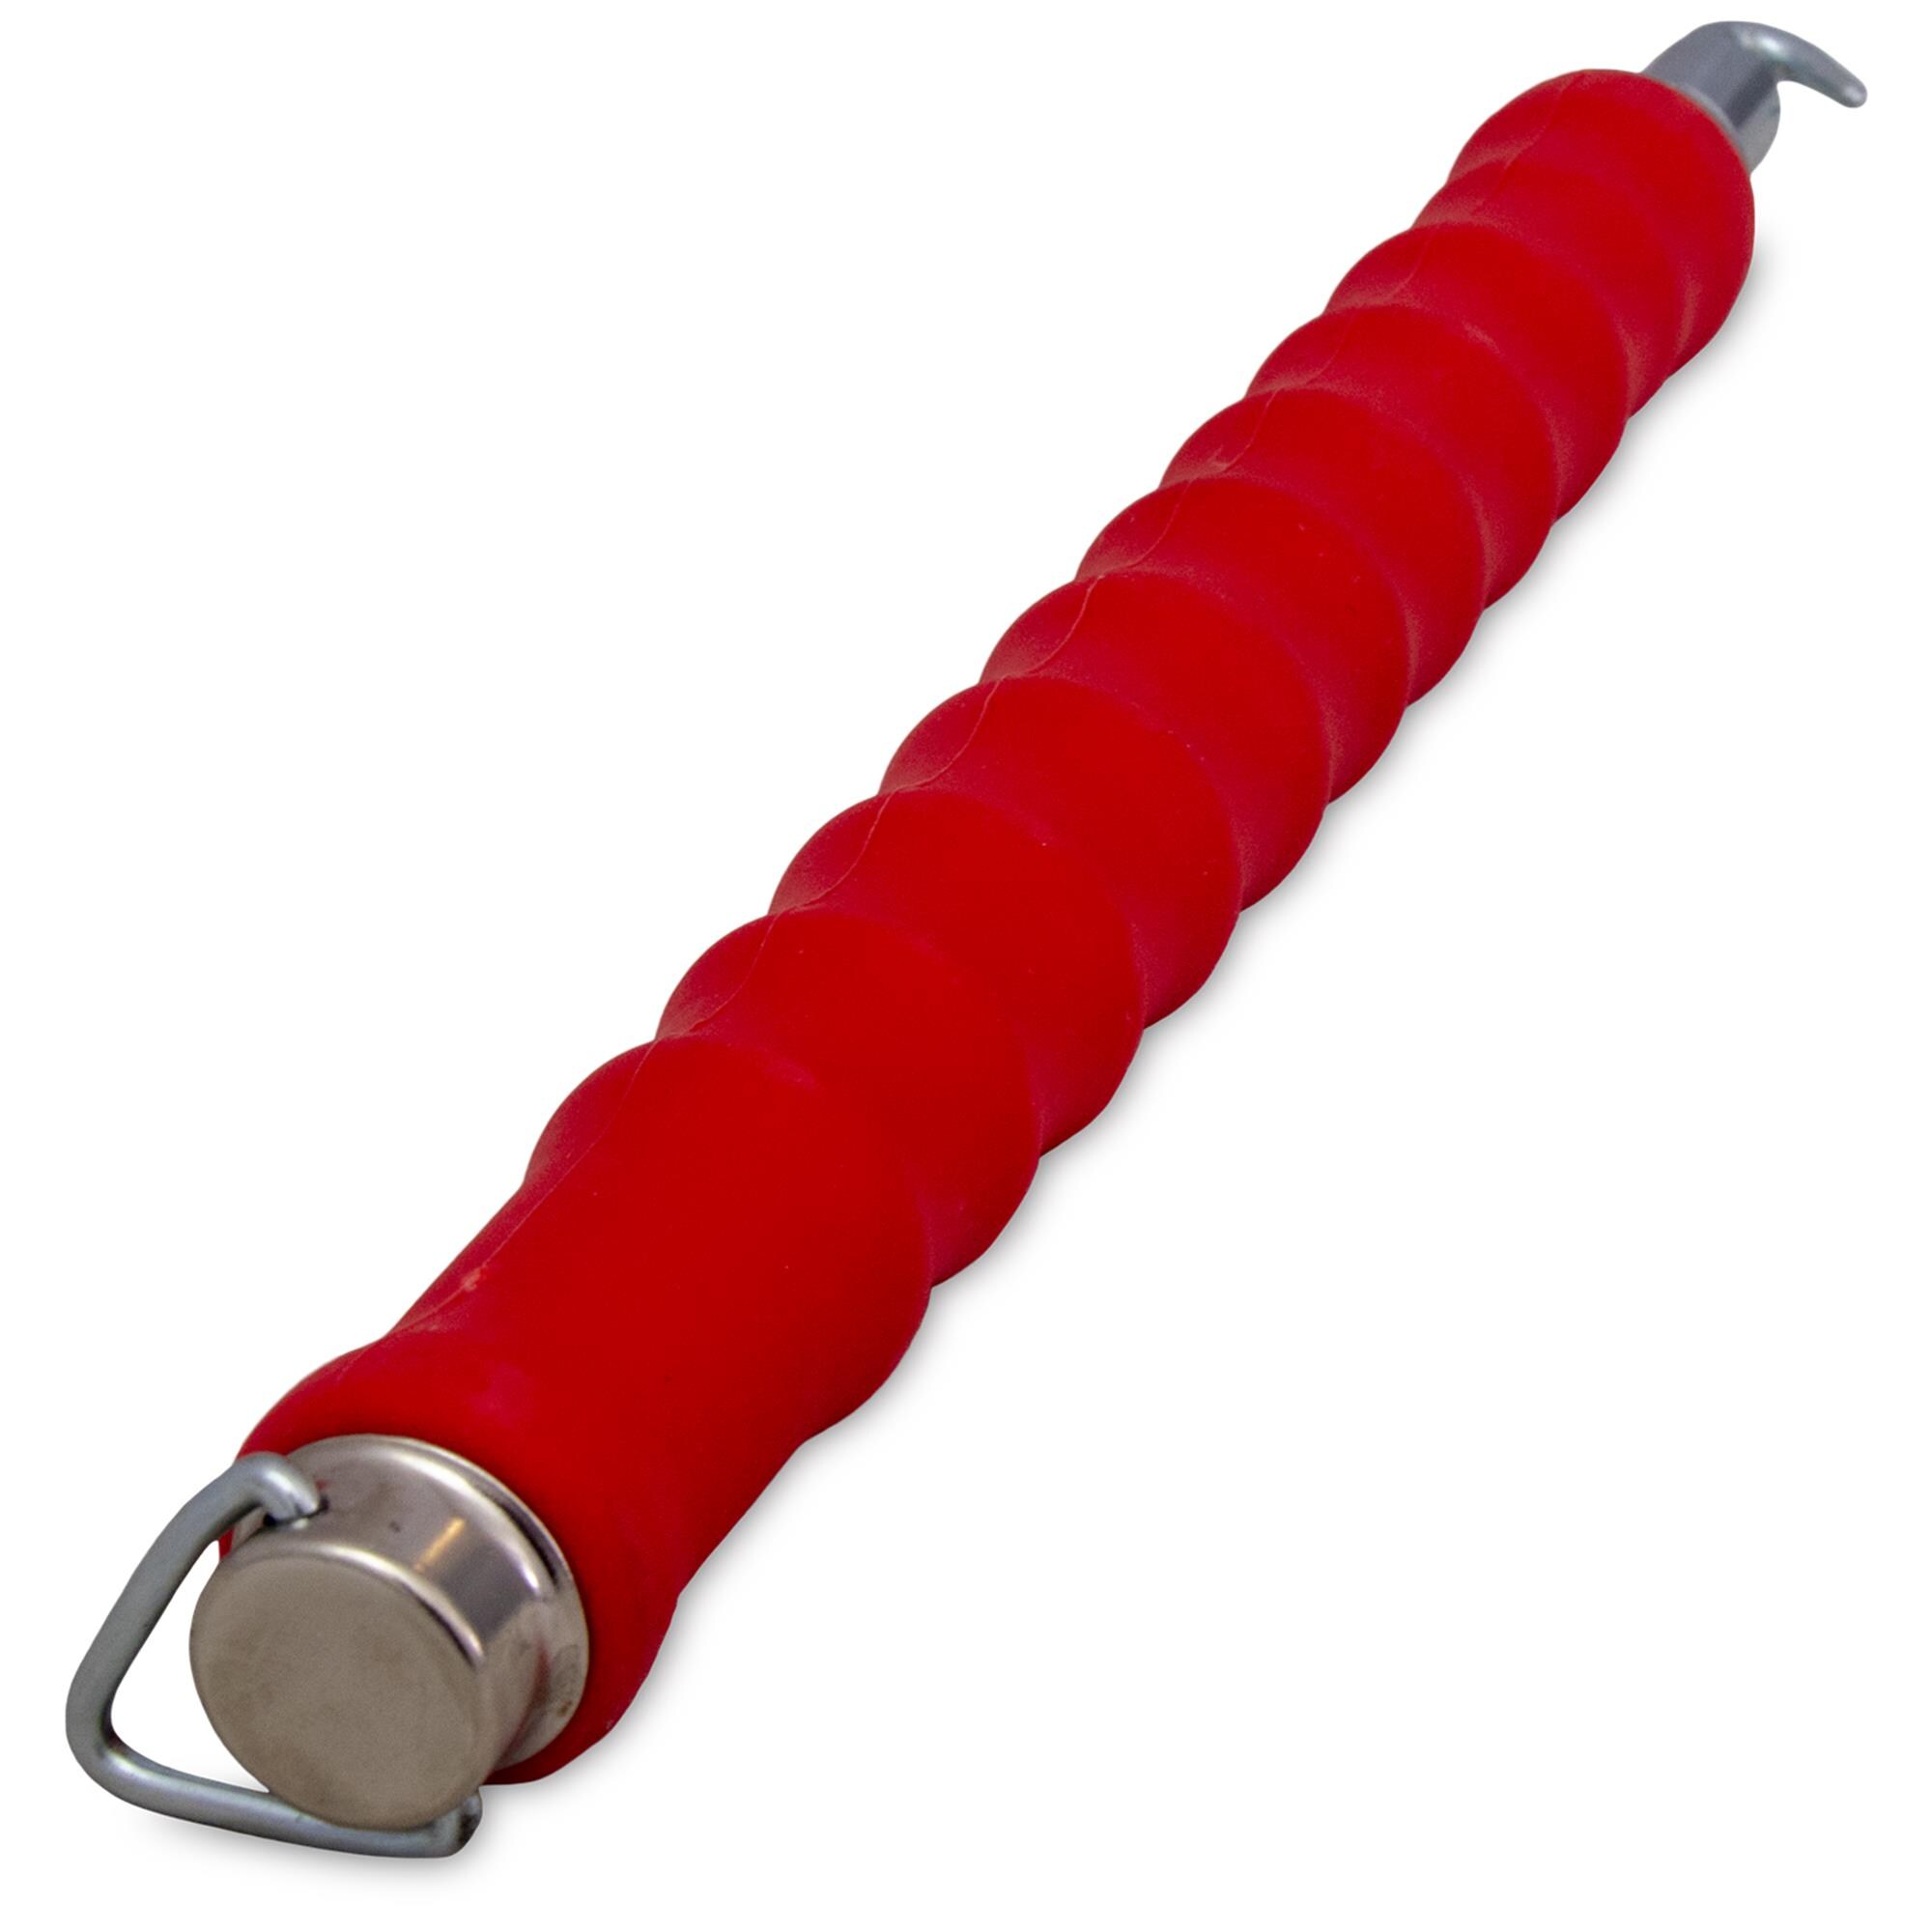 Kraft Tool Co- Tie Wire Twister with Plastic Handle